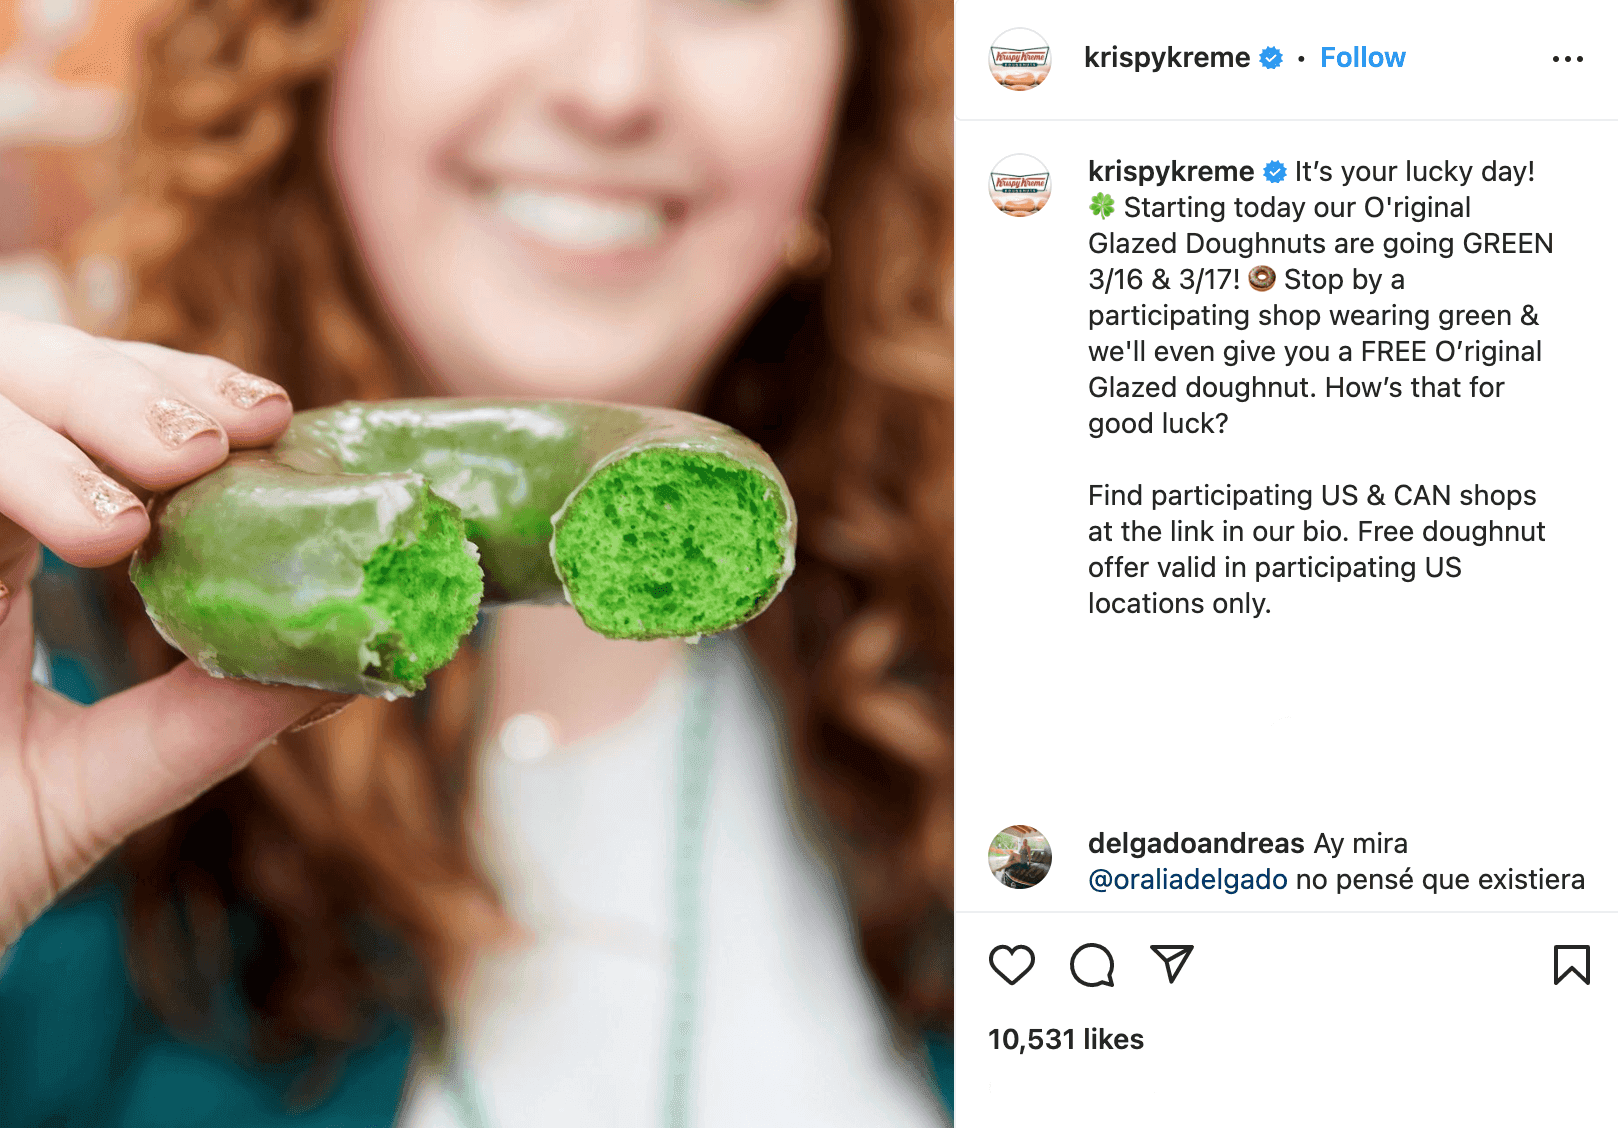 KrisyKreme promotion to get a free doughnut if you wear green to their store.